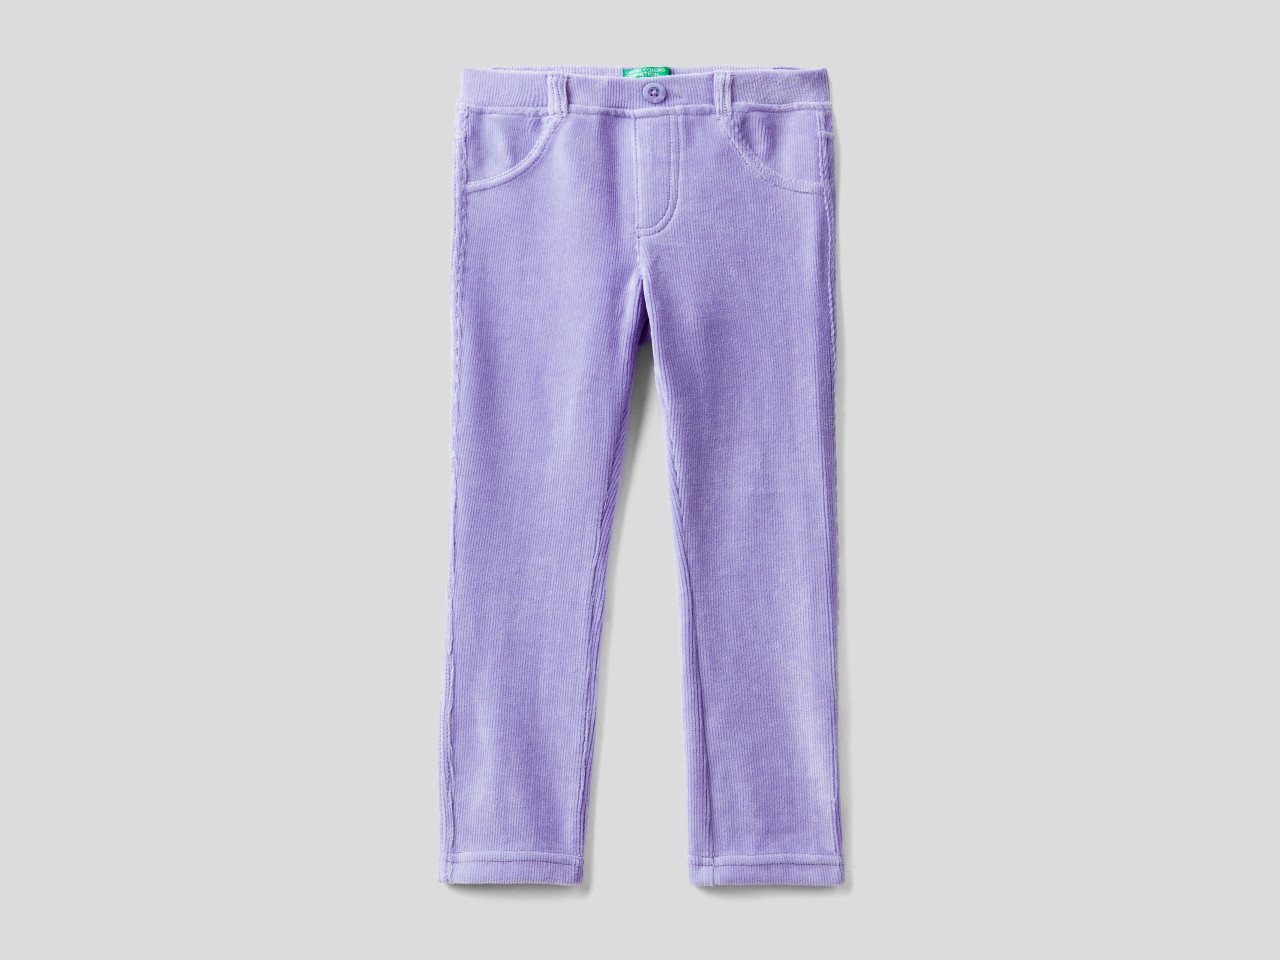 Benetton Girls Lilac Corduroy Stretch trousers United Colors of Benetton 5-6 years 